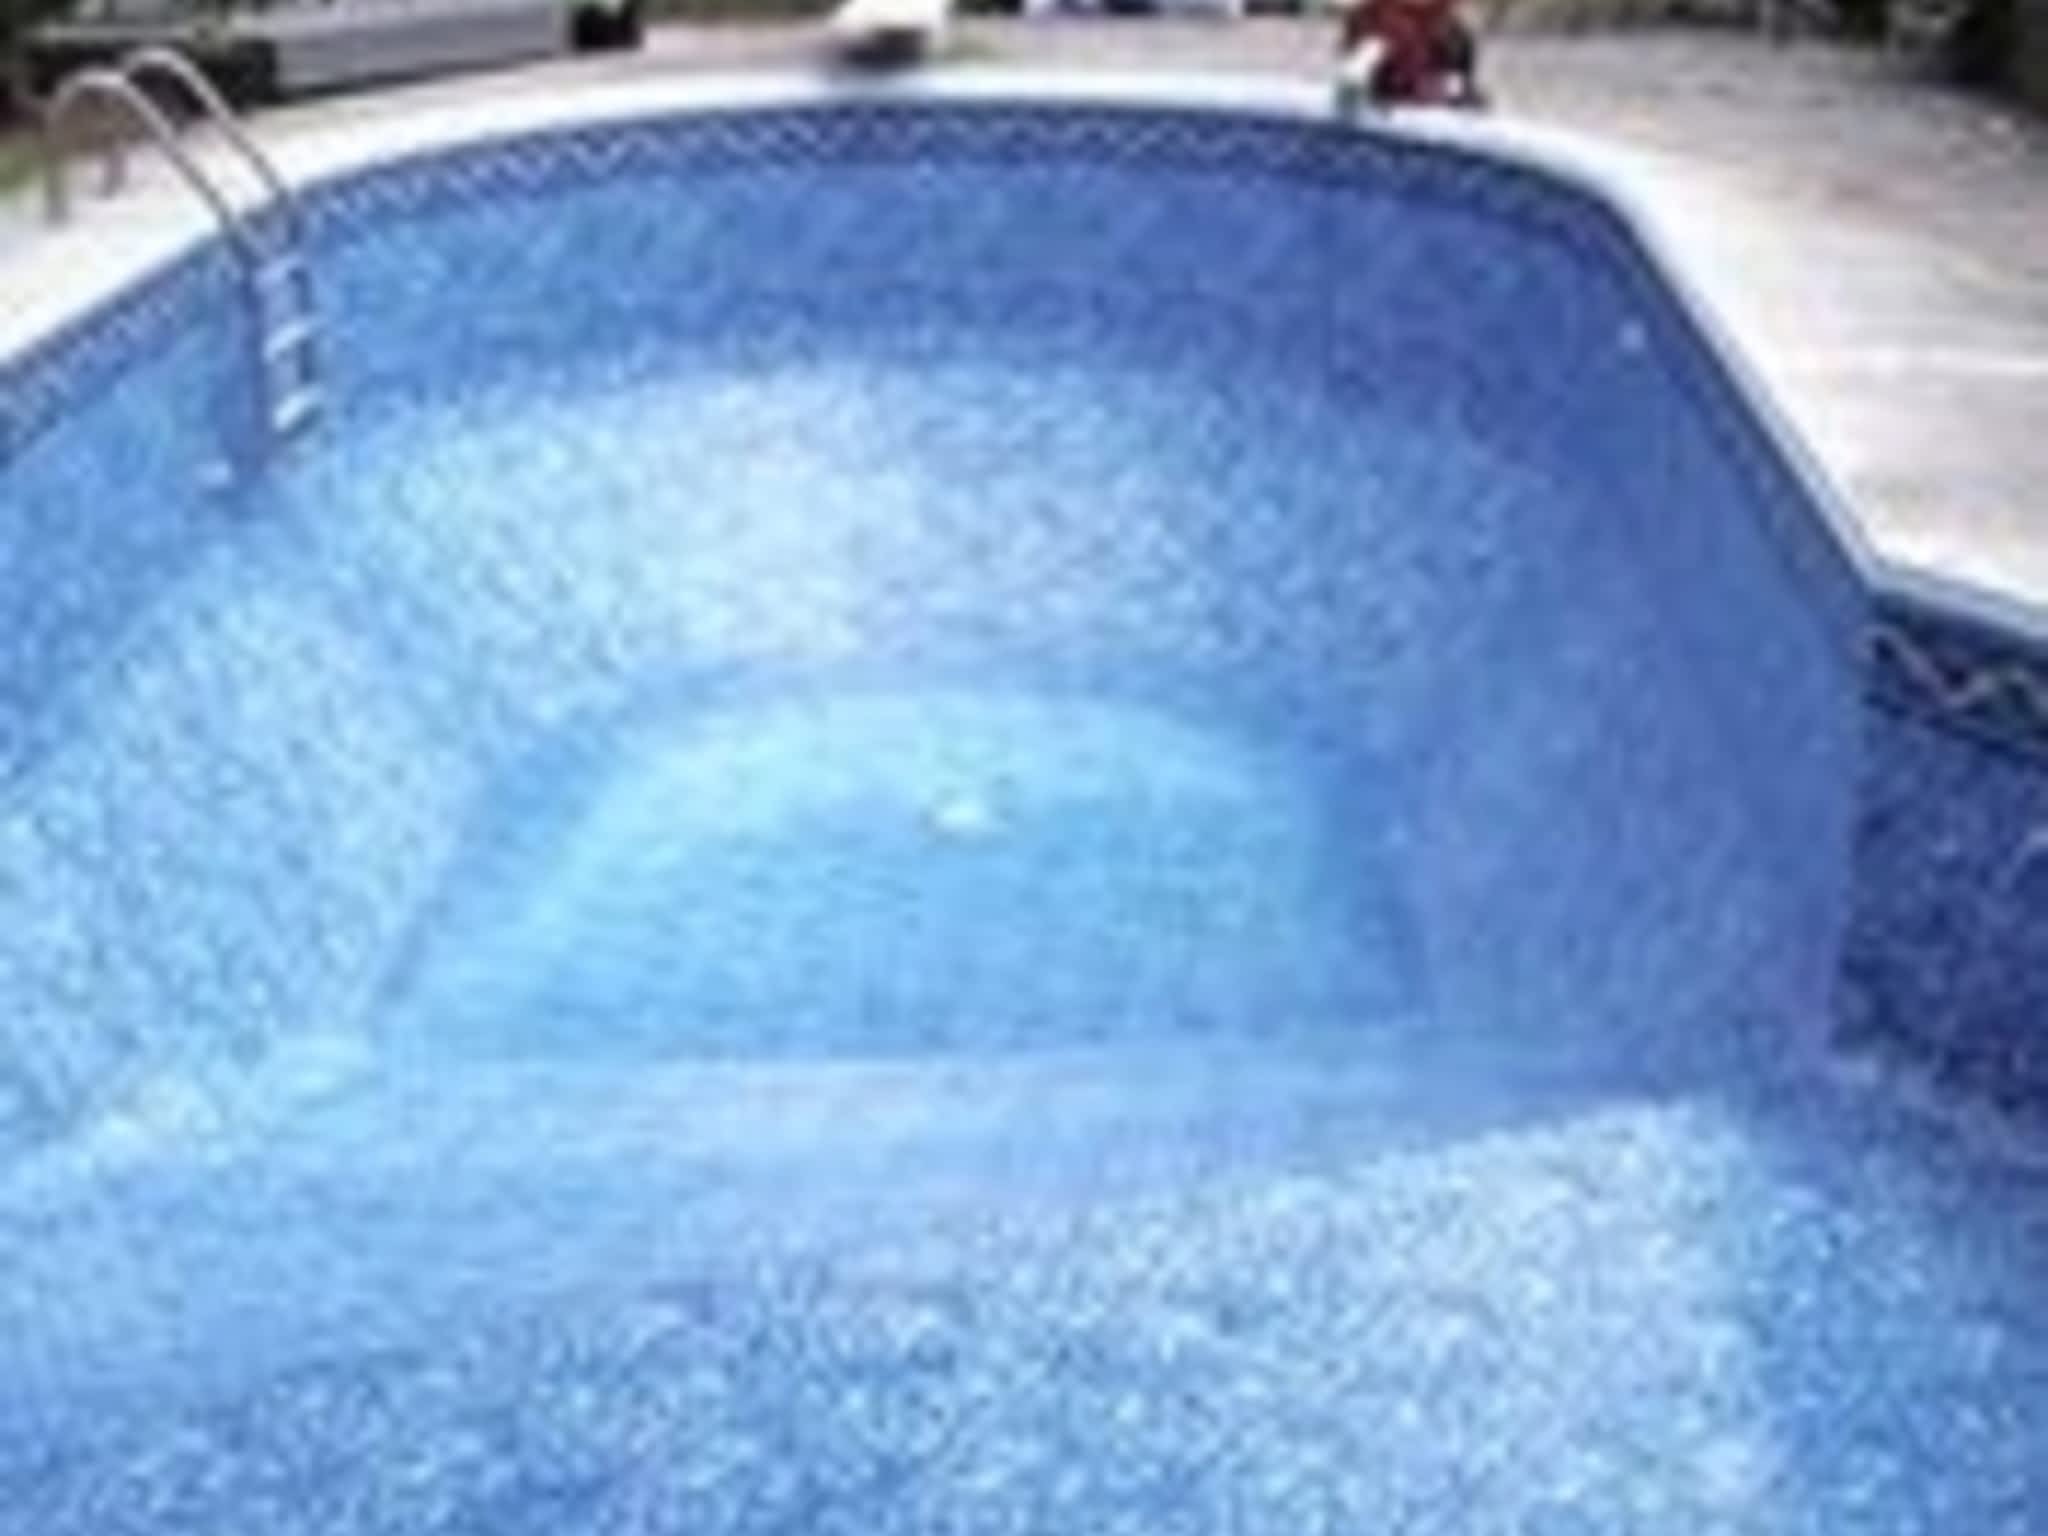 photo Select Pool Services Inc